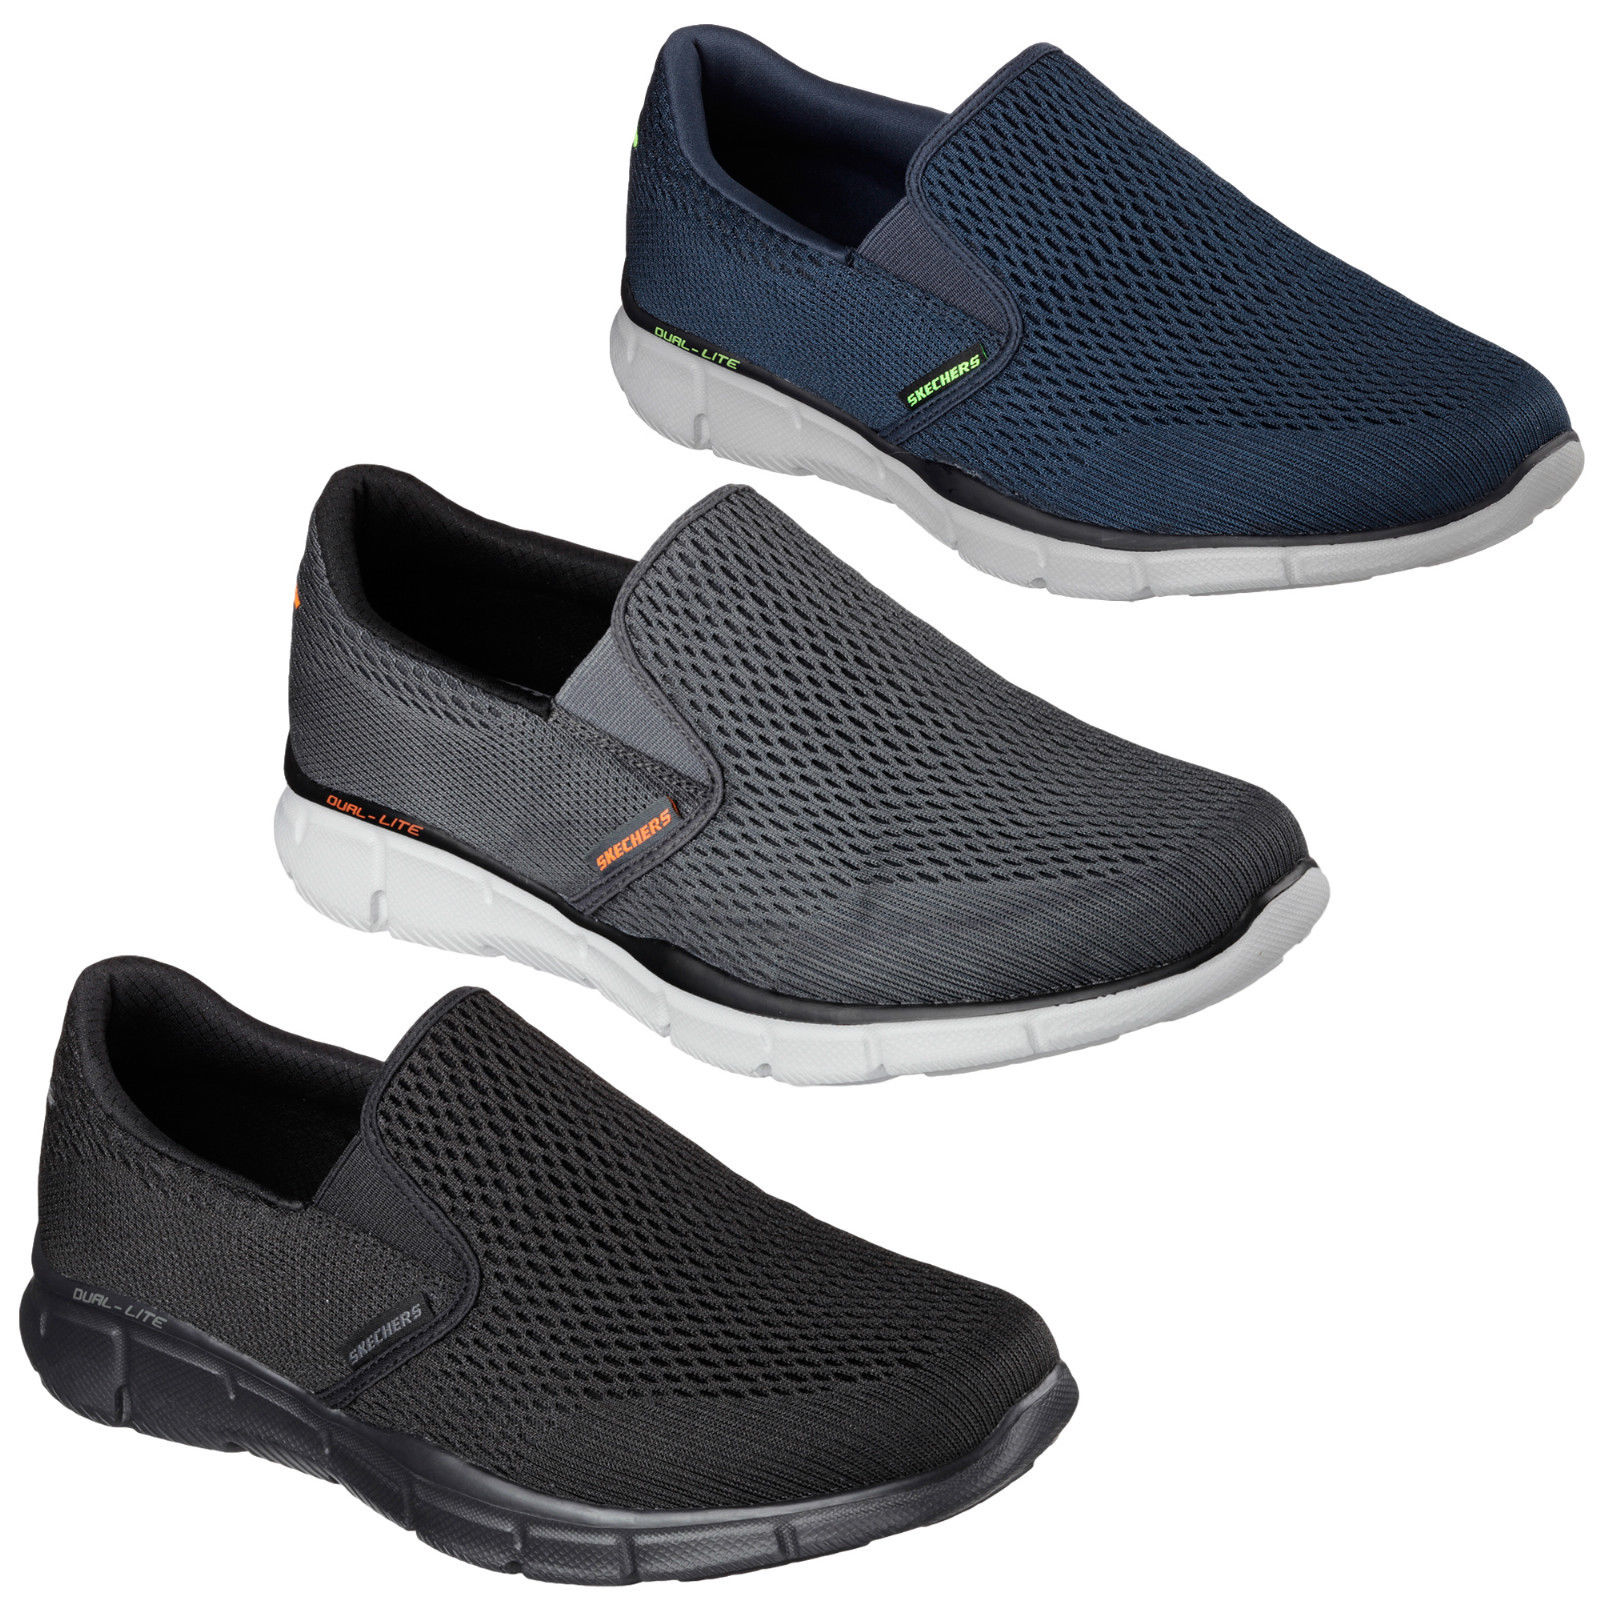 Mens Skechers Equalizer-Double Play Casual Slip On Trainers Shoes Sizes ...